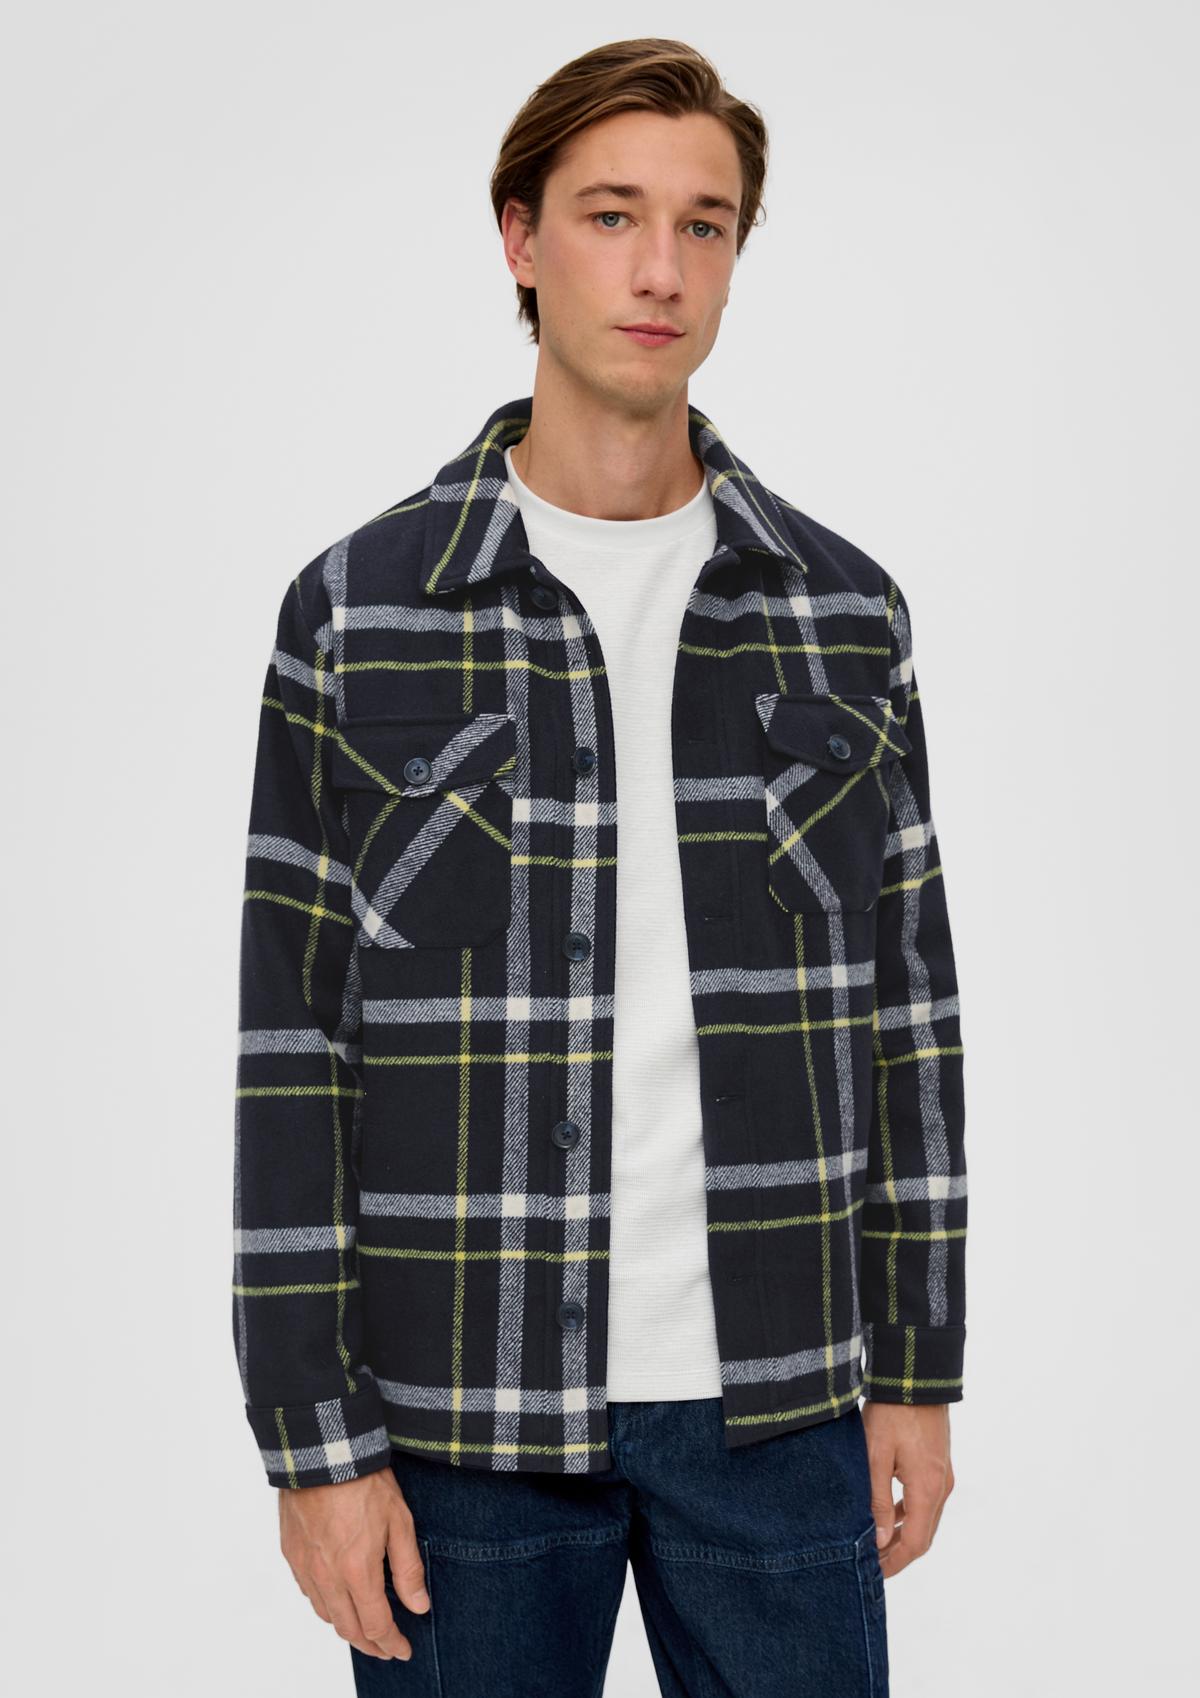 Overshirt in flannel fabric